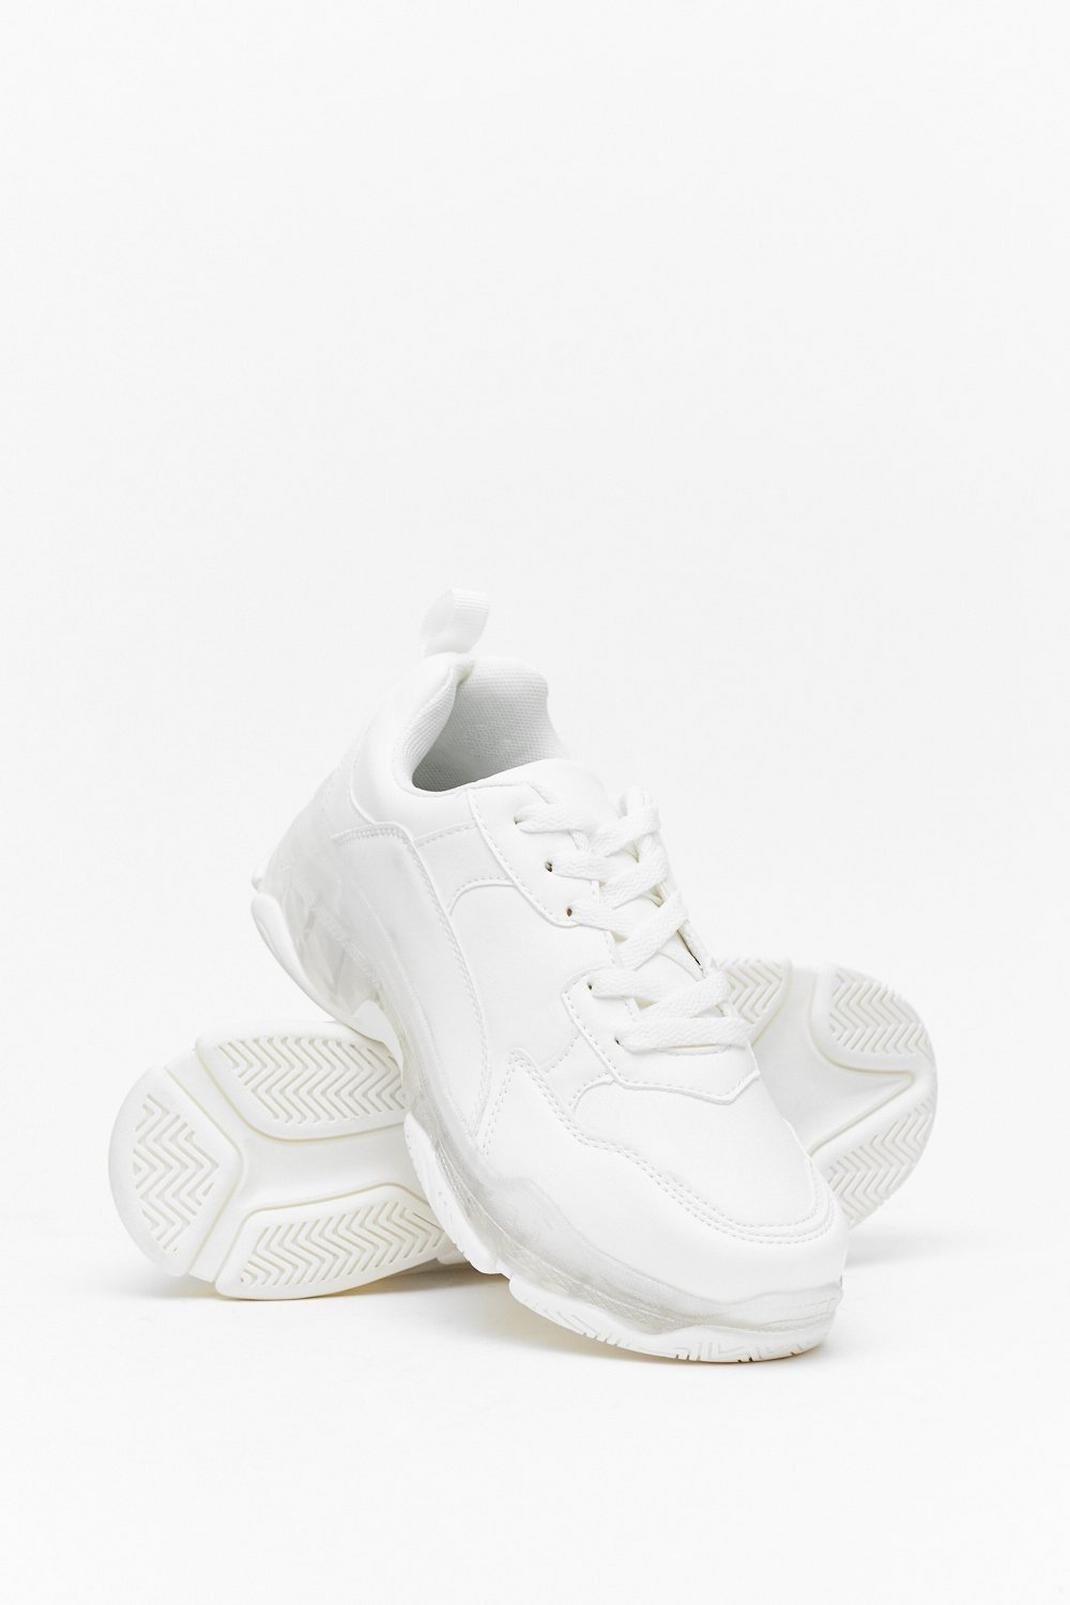 Out of Your League Faux Leather Bubble Sneakers image number 1